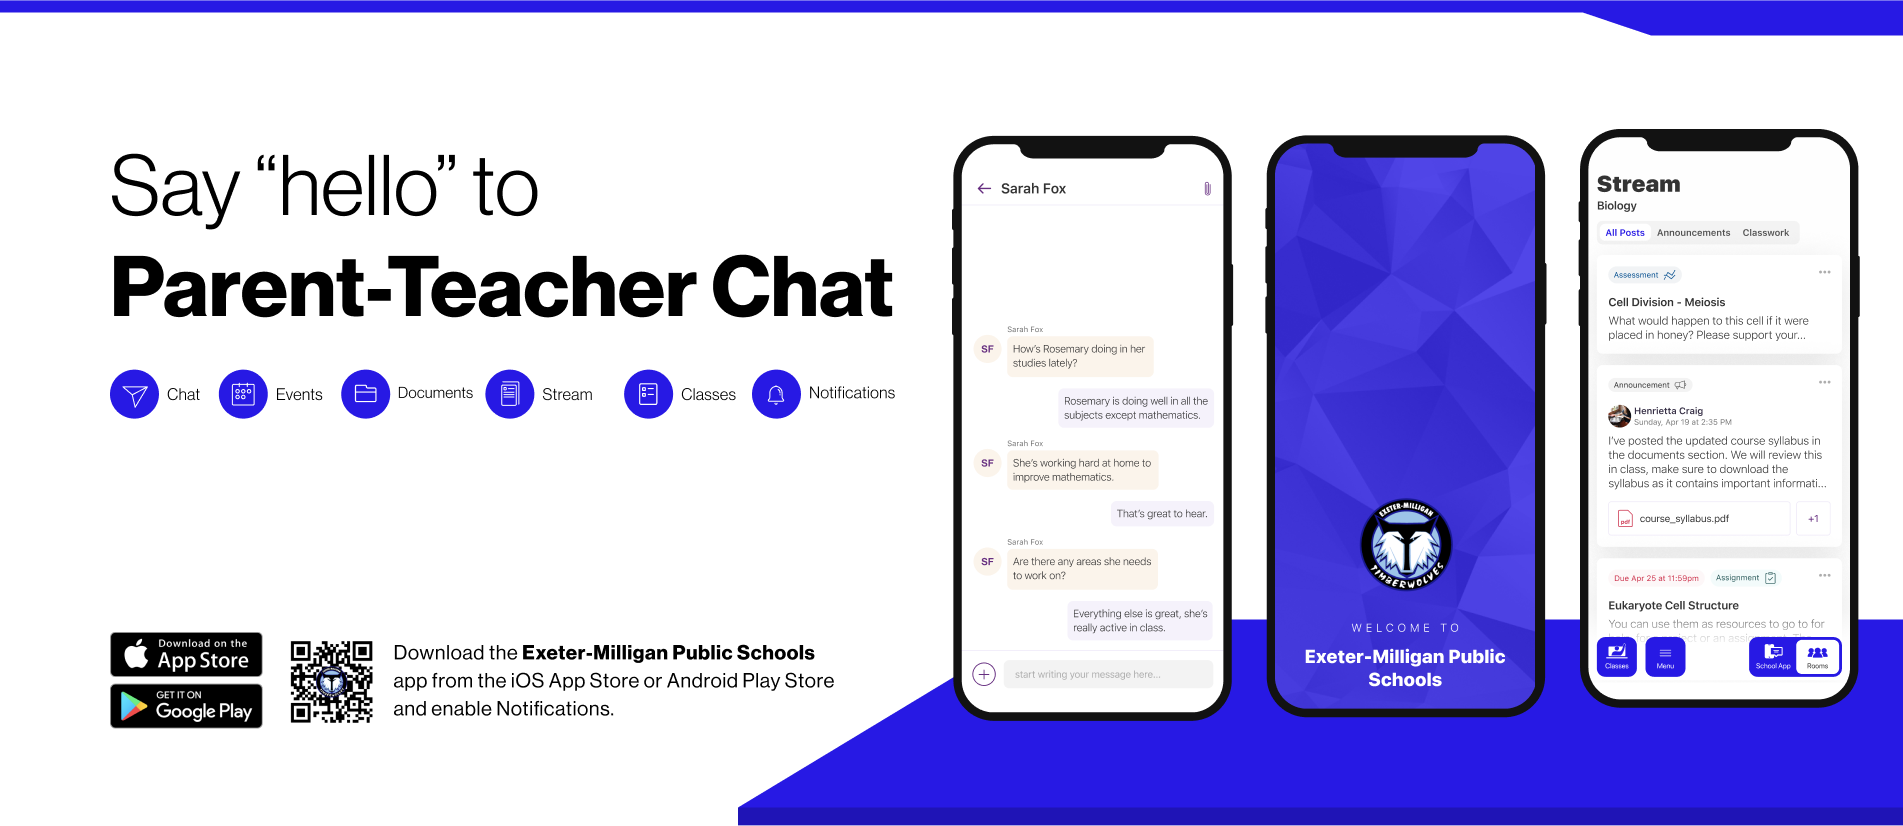 “Say hello to Parent-Teacher chat in the new Rooms app. Download the (Exeter - Miligan) app in the Google Play or Apple App store.”